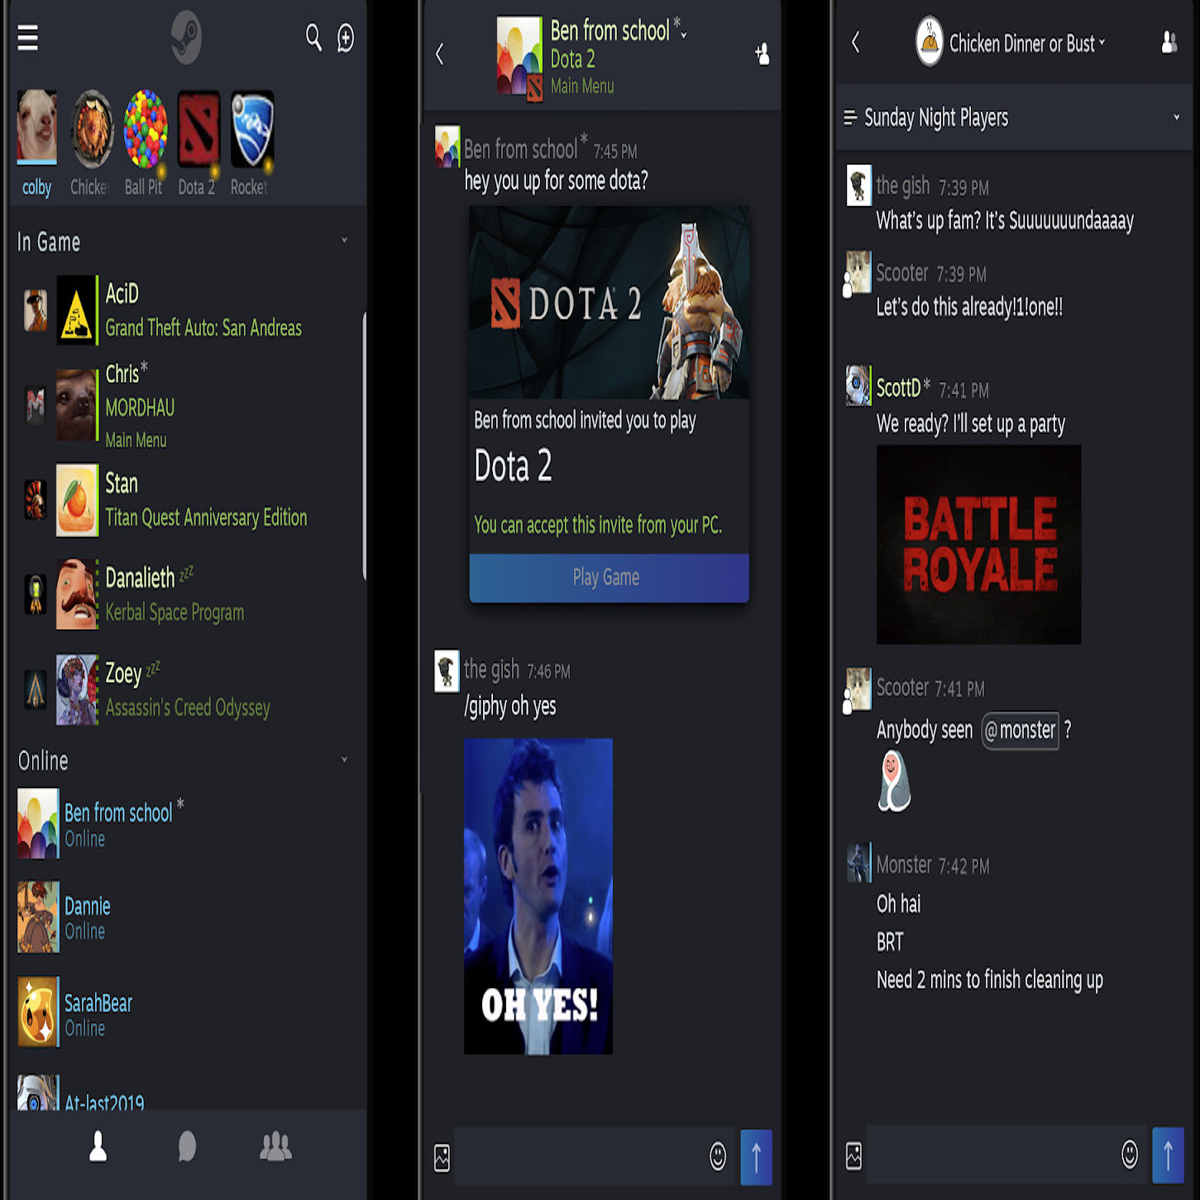 Valve Launches New Steam Chat App for iOS, Android